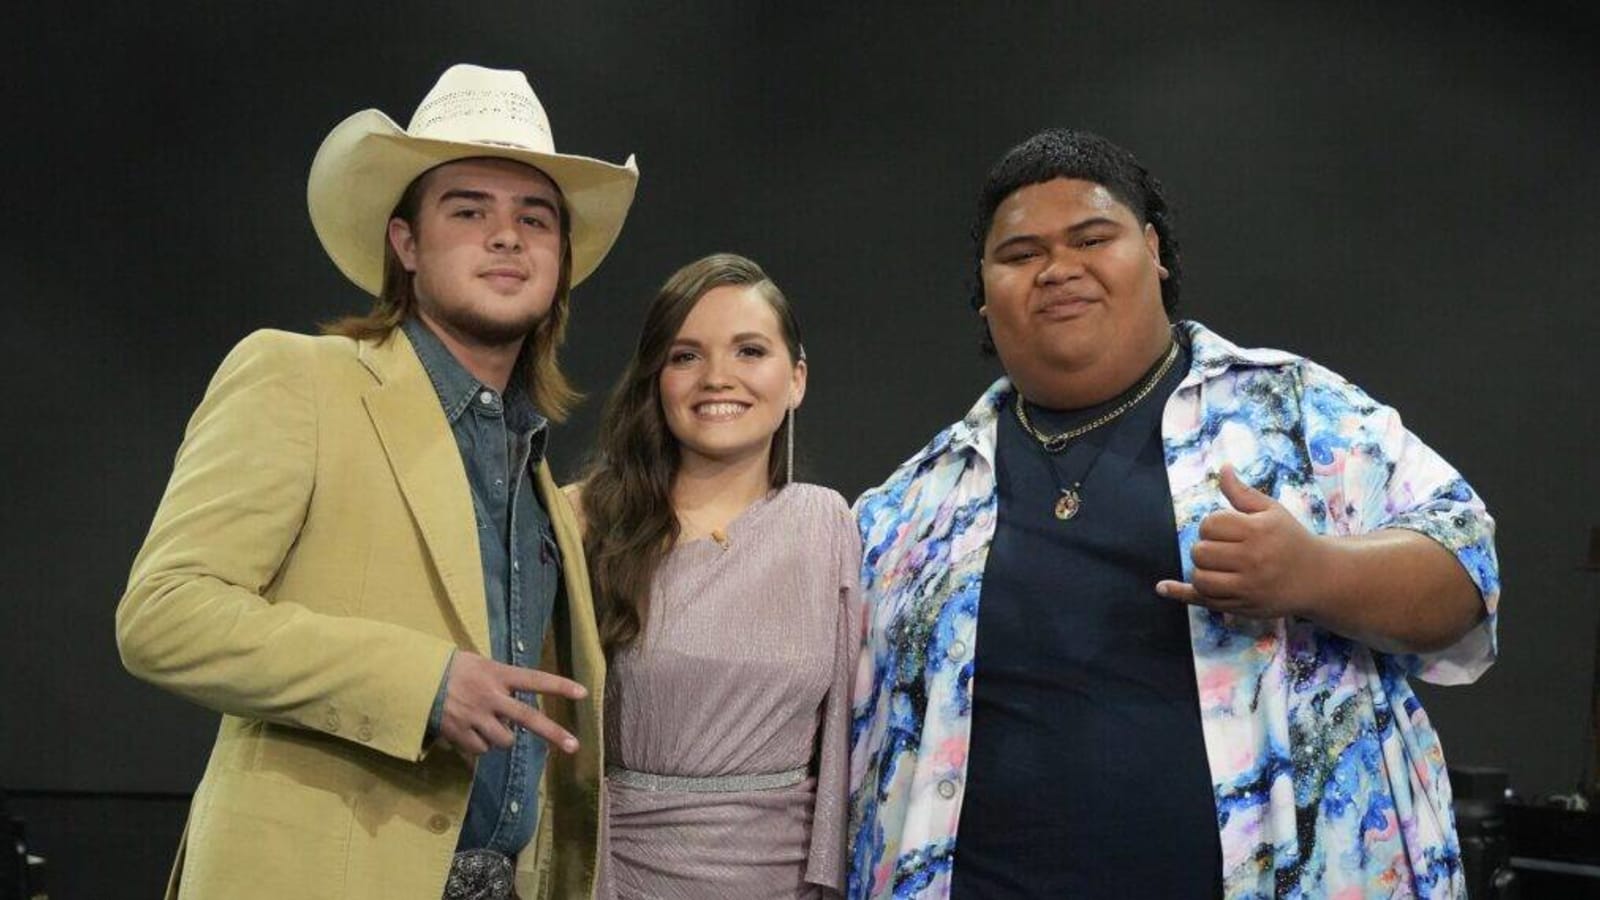 ‘American Idol’ 2023 crowned during star-studded finale (Recap)